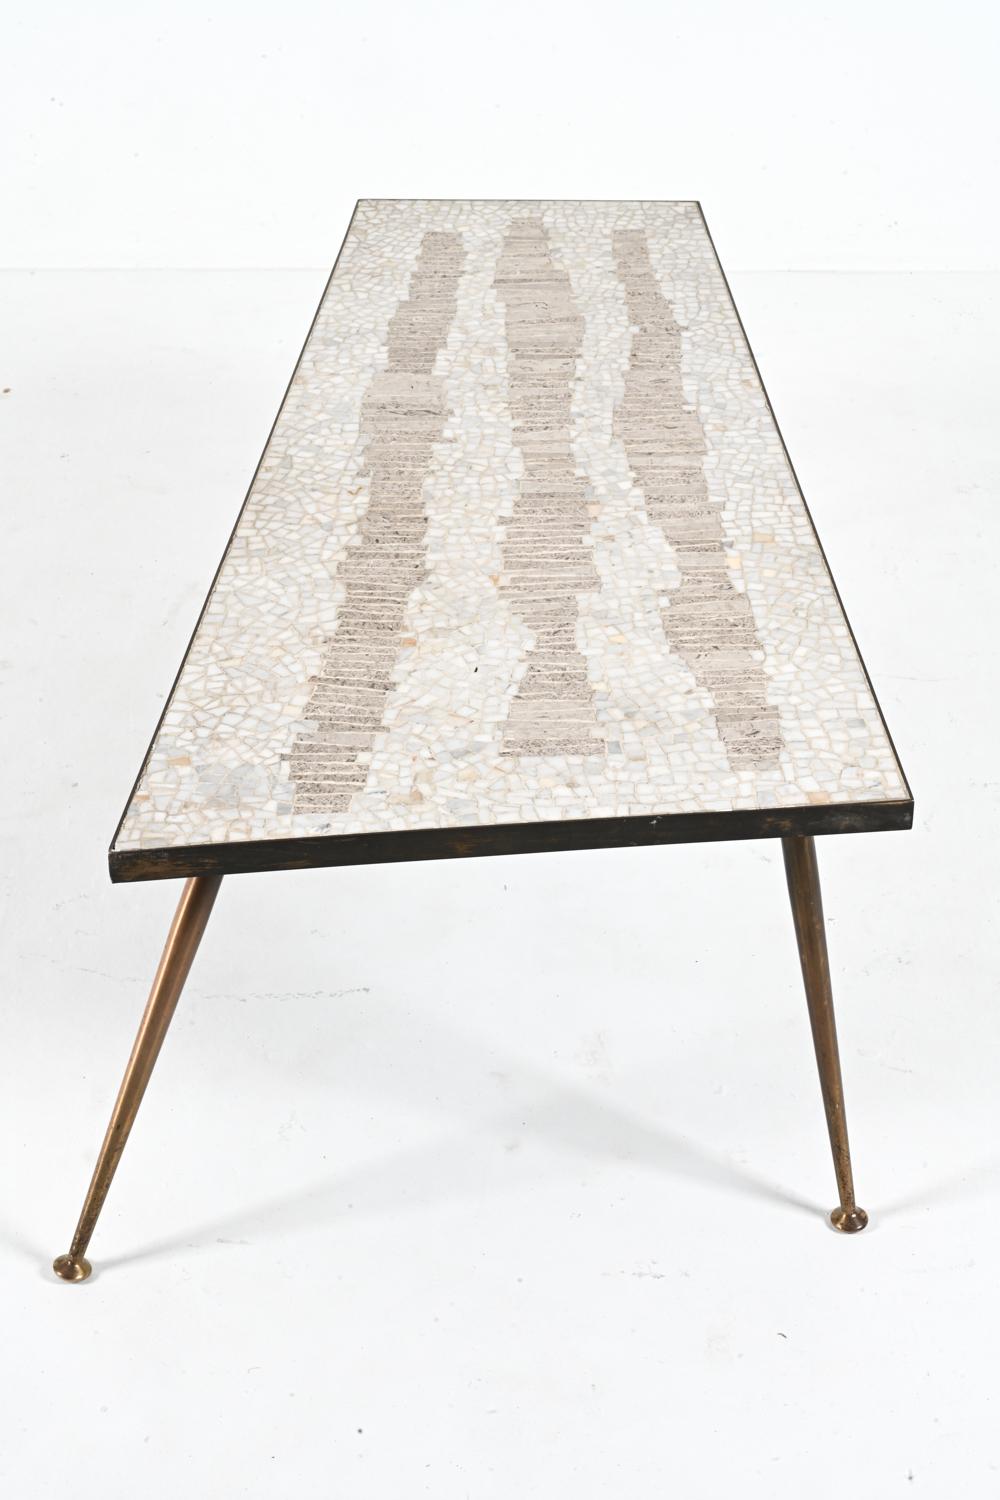 Berthold Muller Brass & Stone Mosaic Coffee Table, Germany, c. 1950's For Sale 9